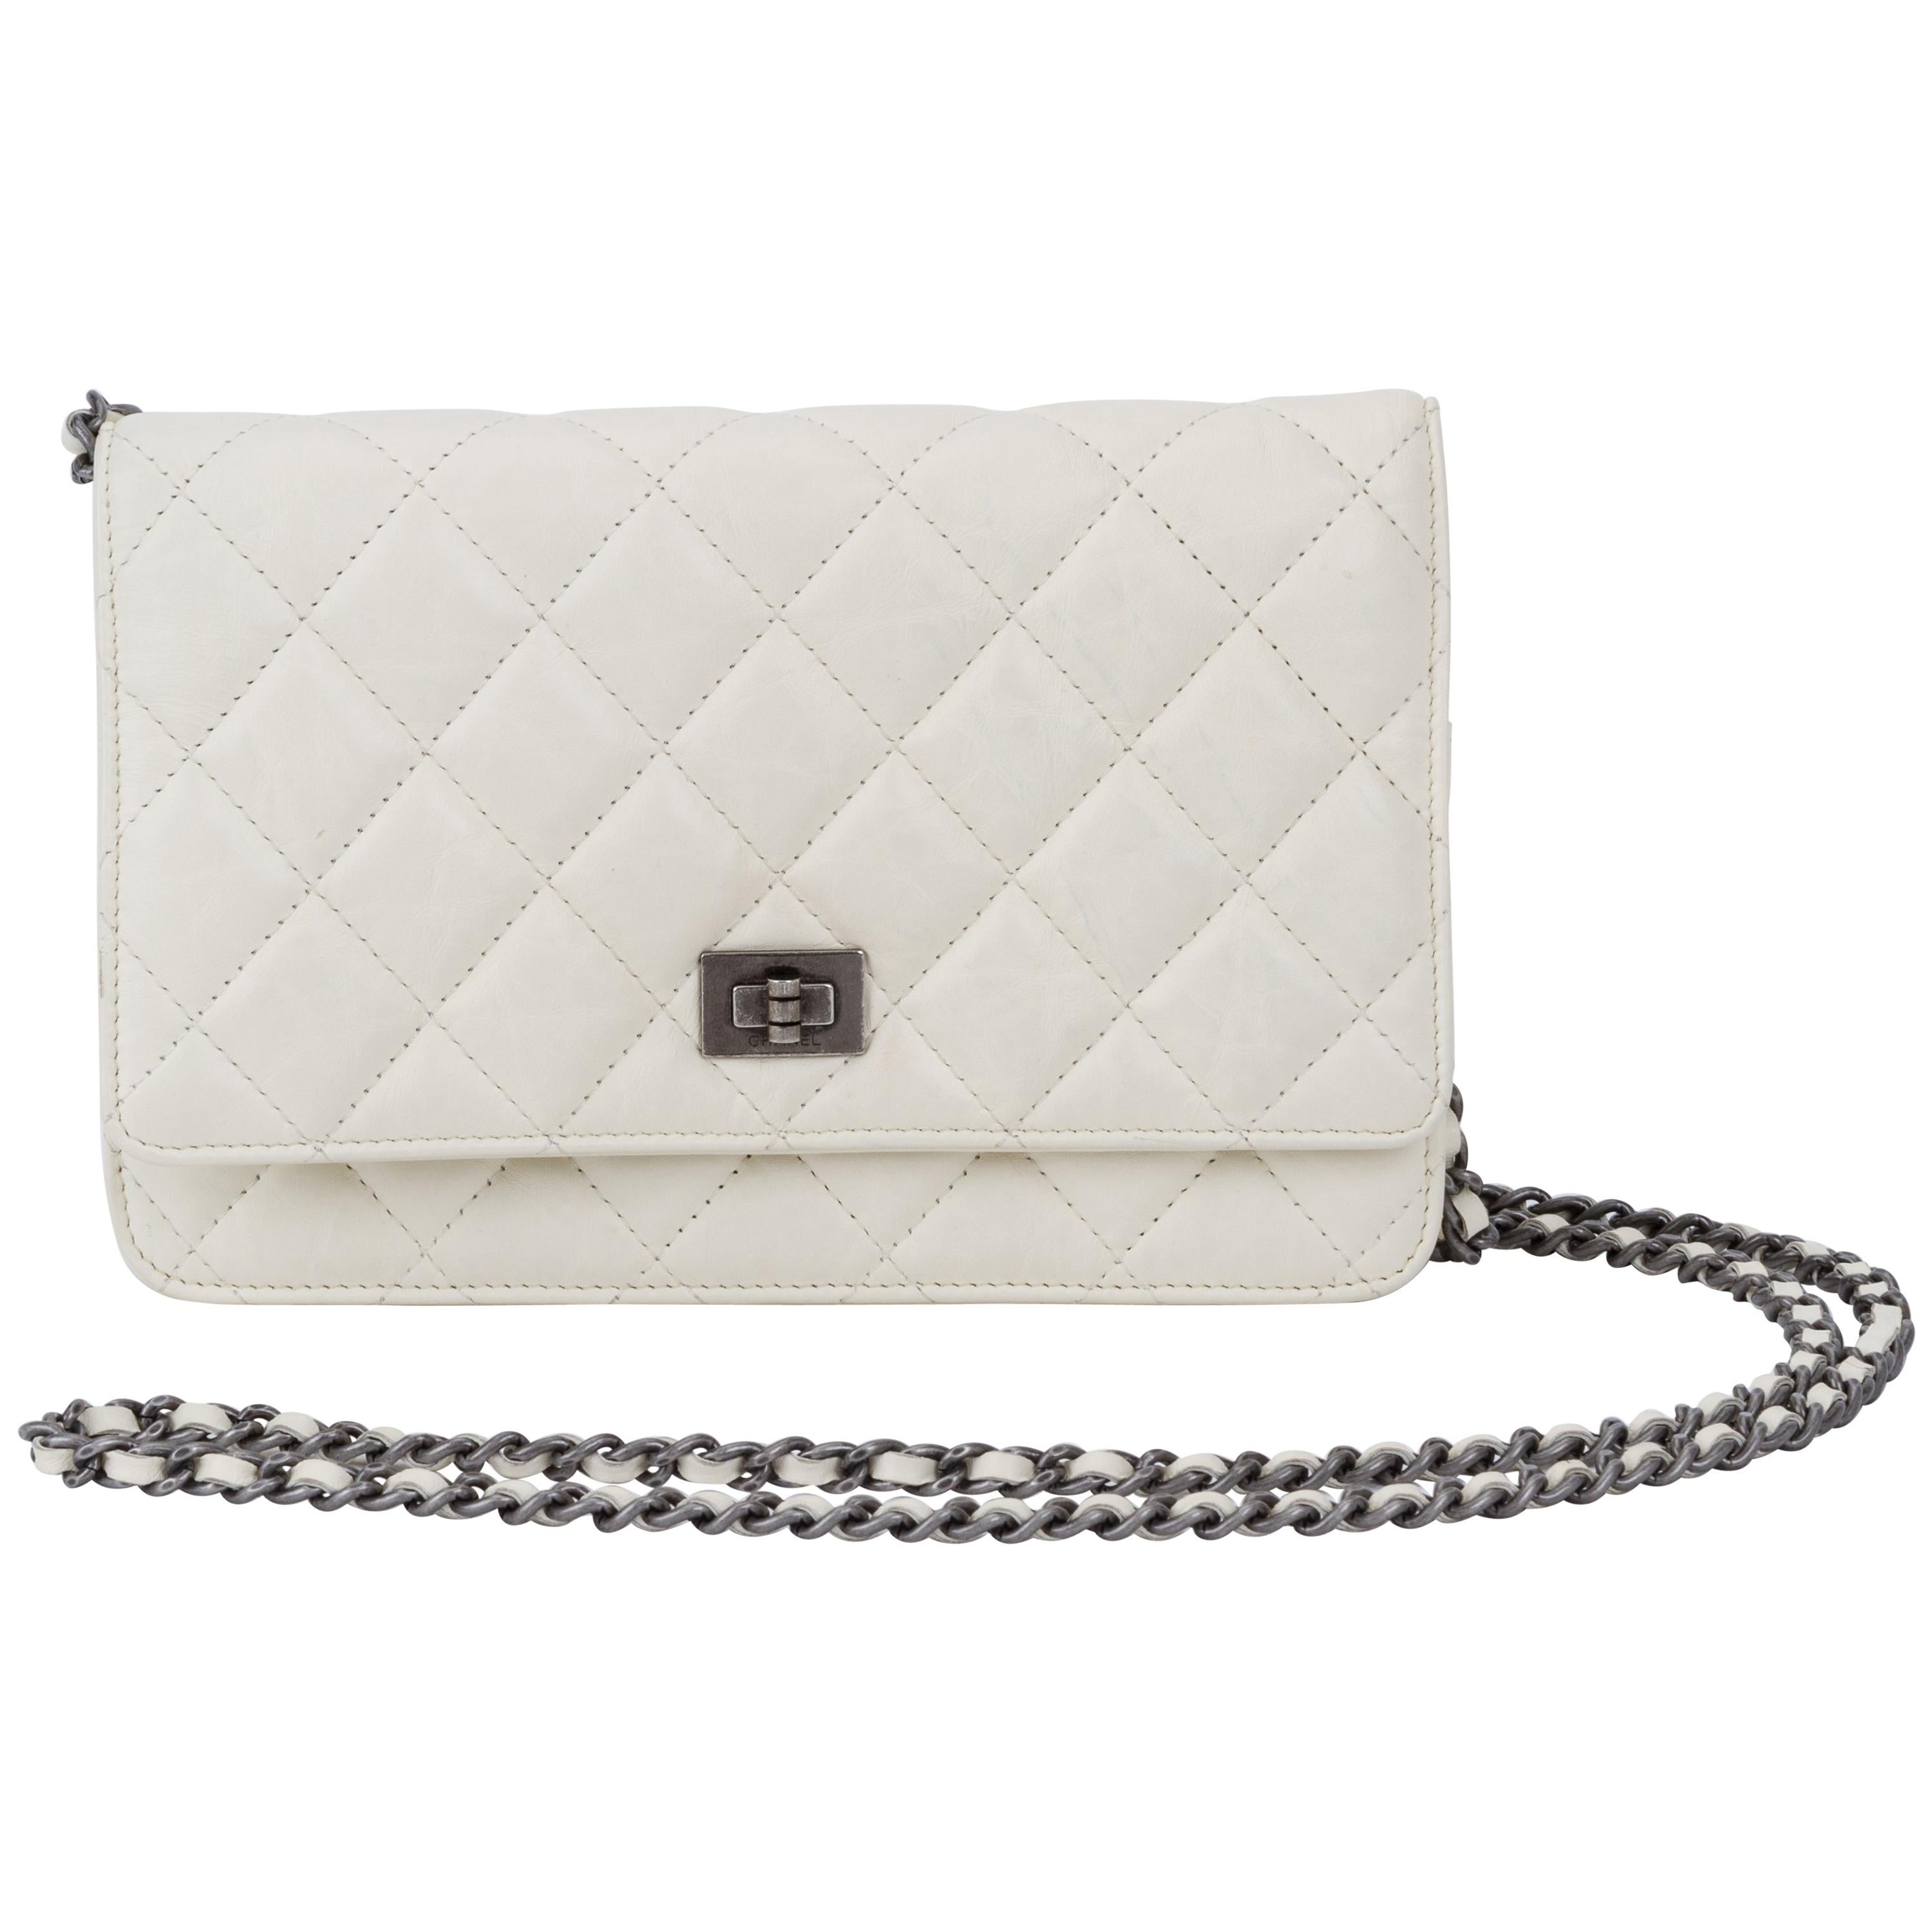 Chanel Reissue White Wallet On A Chain Bag